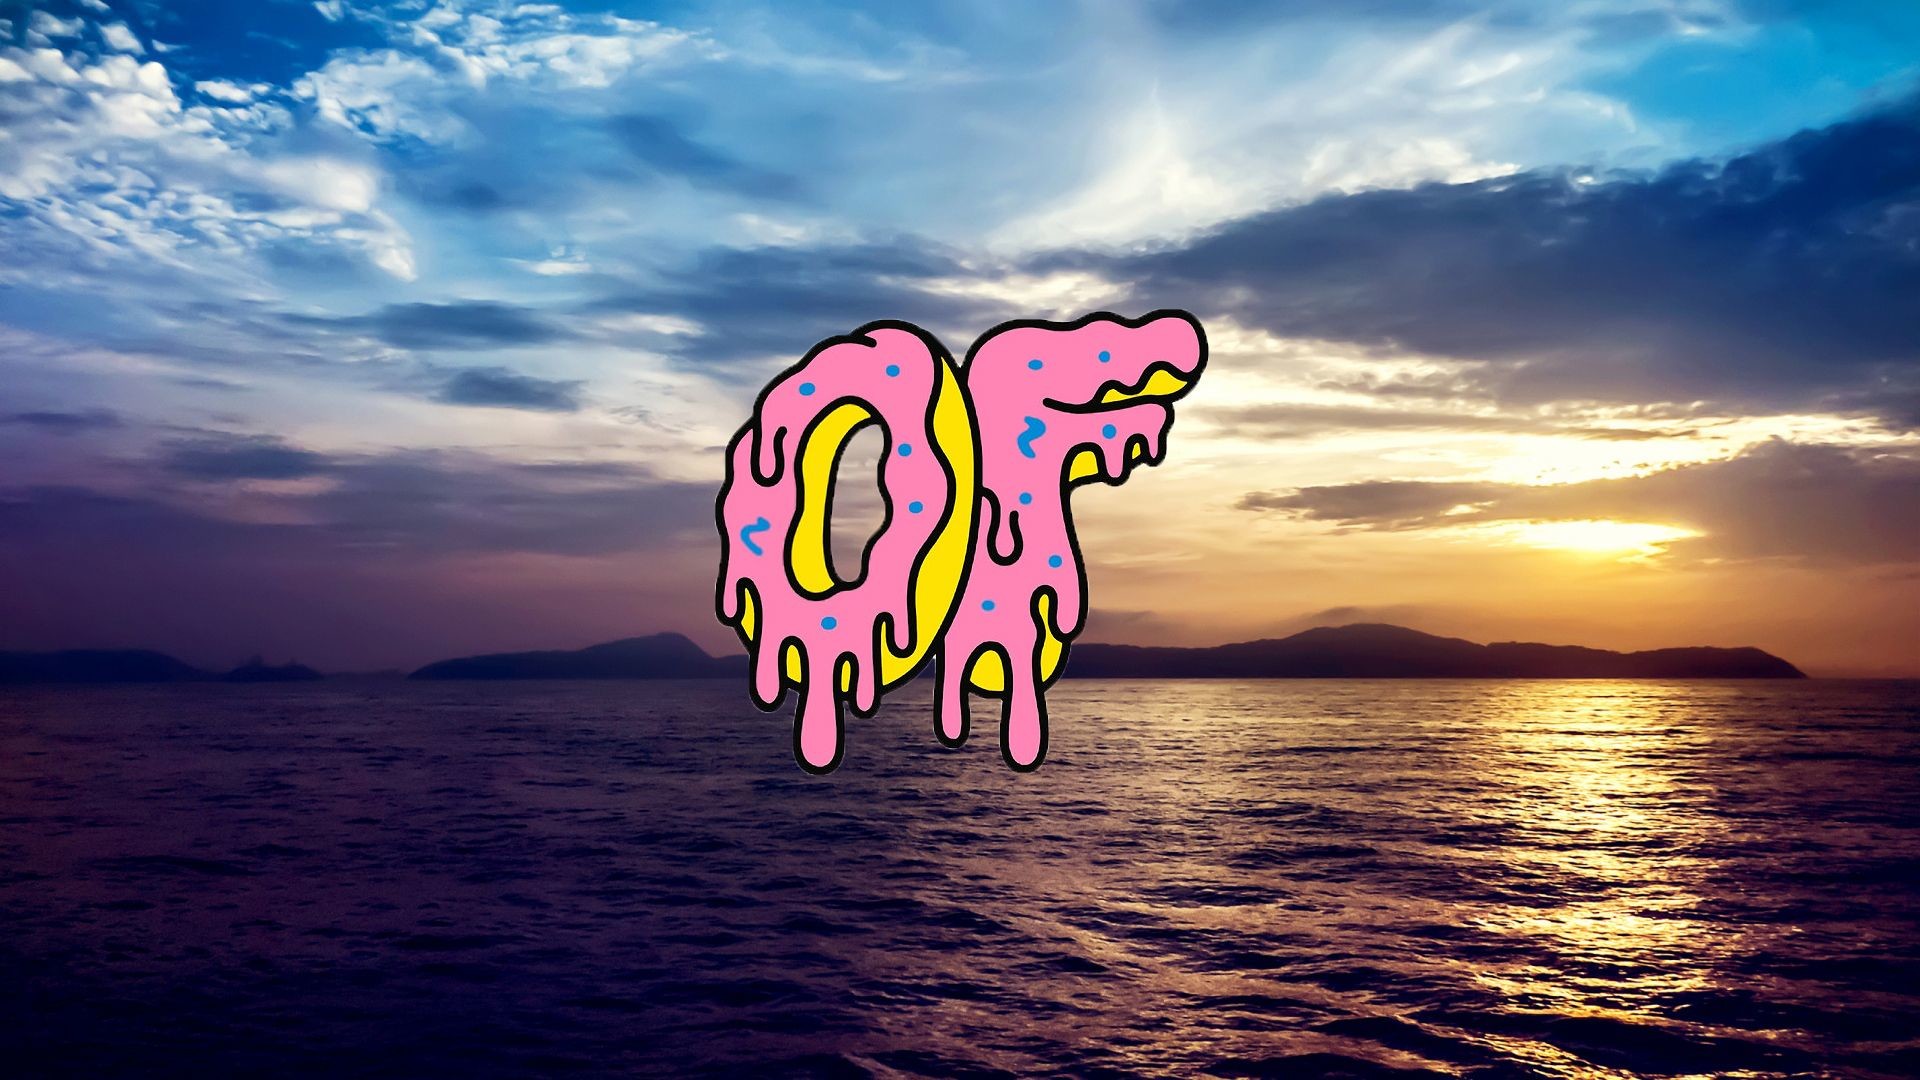 1920x1080 This is a  Odd Future background for your desktop i just made it i  think its pretty cool... Just tell me if you want more!